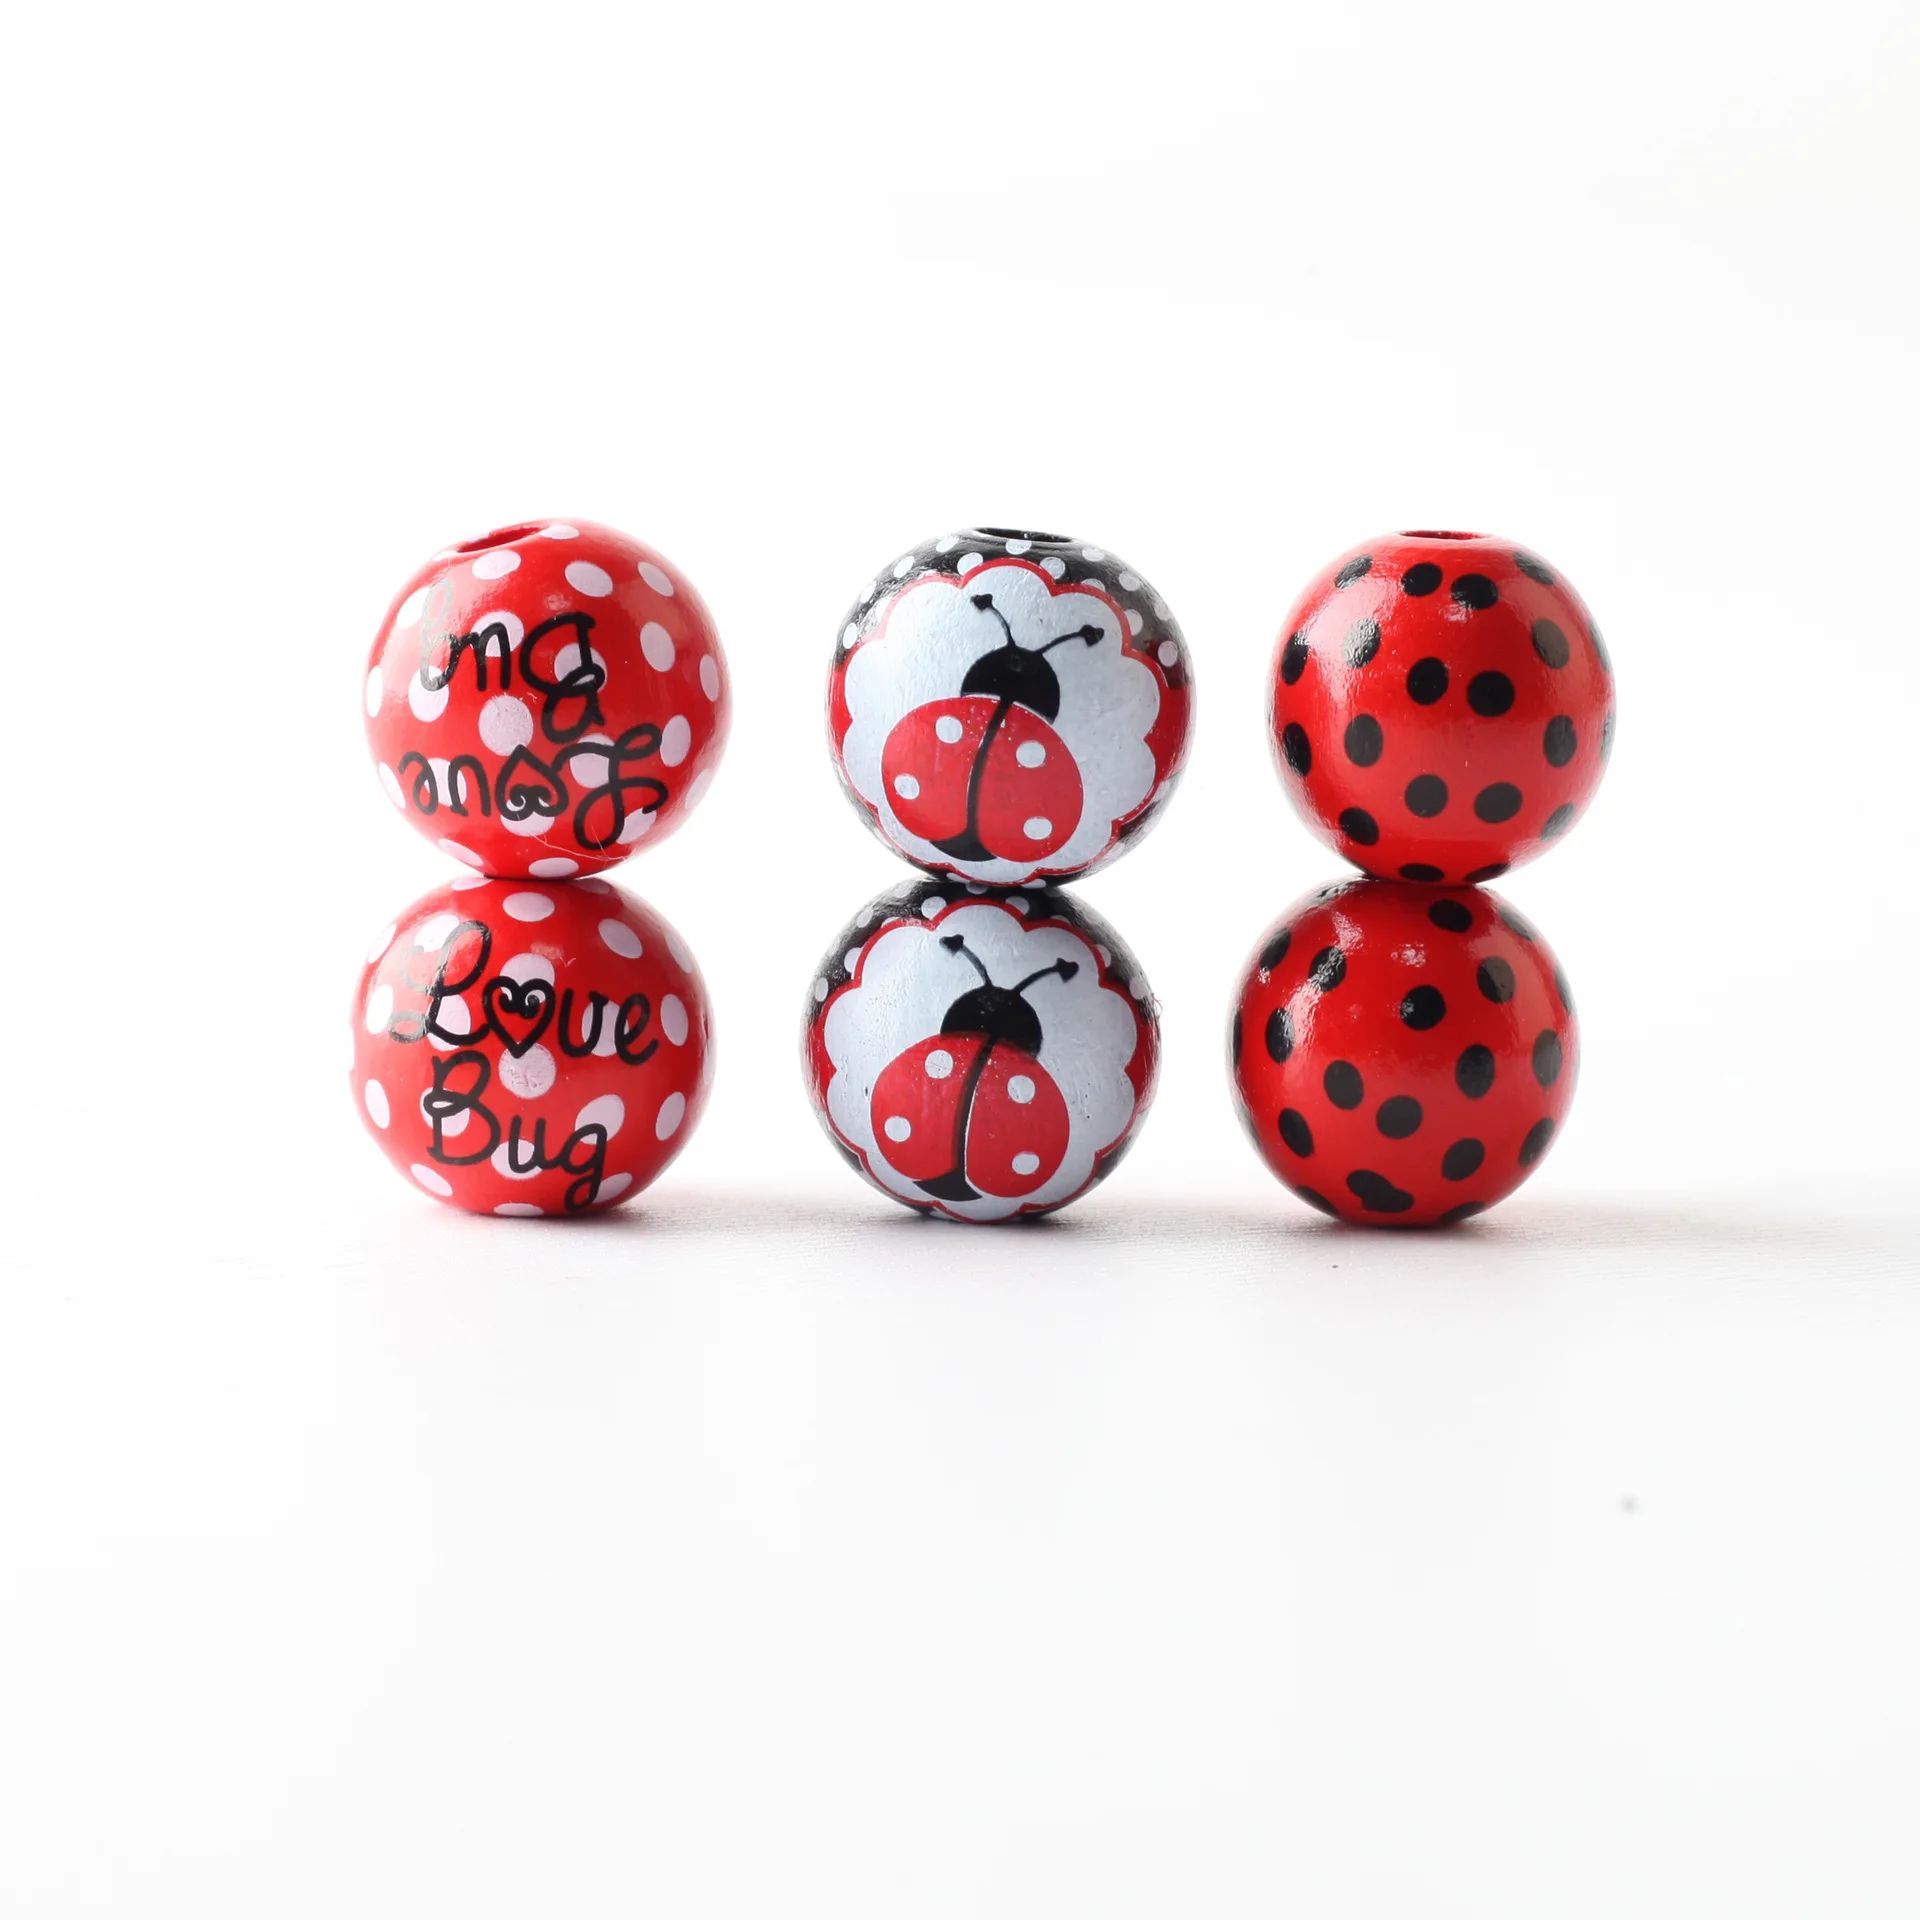 

16mm 20pcs Ladybug Print Wood Beads Round Spacer Wooden Pearl Lead-Free Balls Charms DIY For Jewelry Making Handmade Accessories